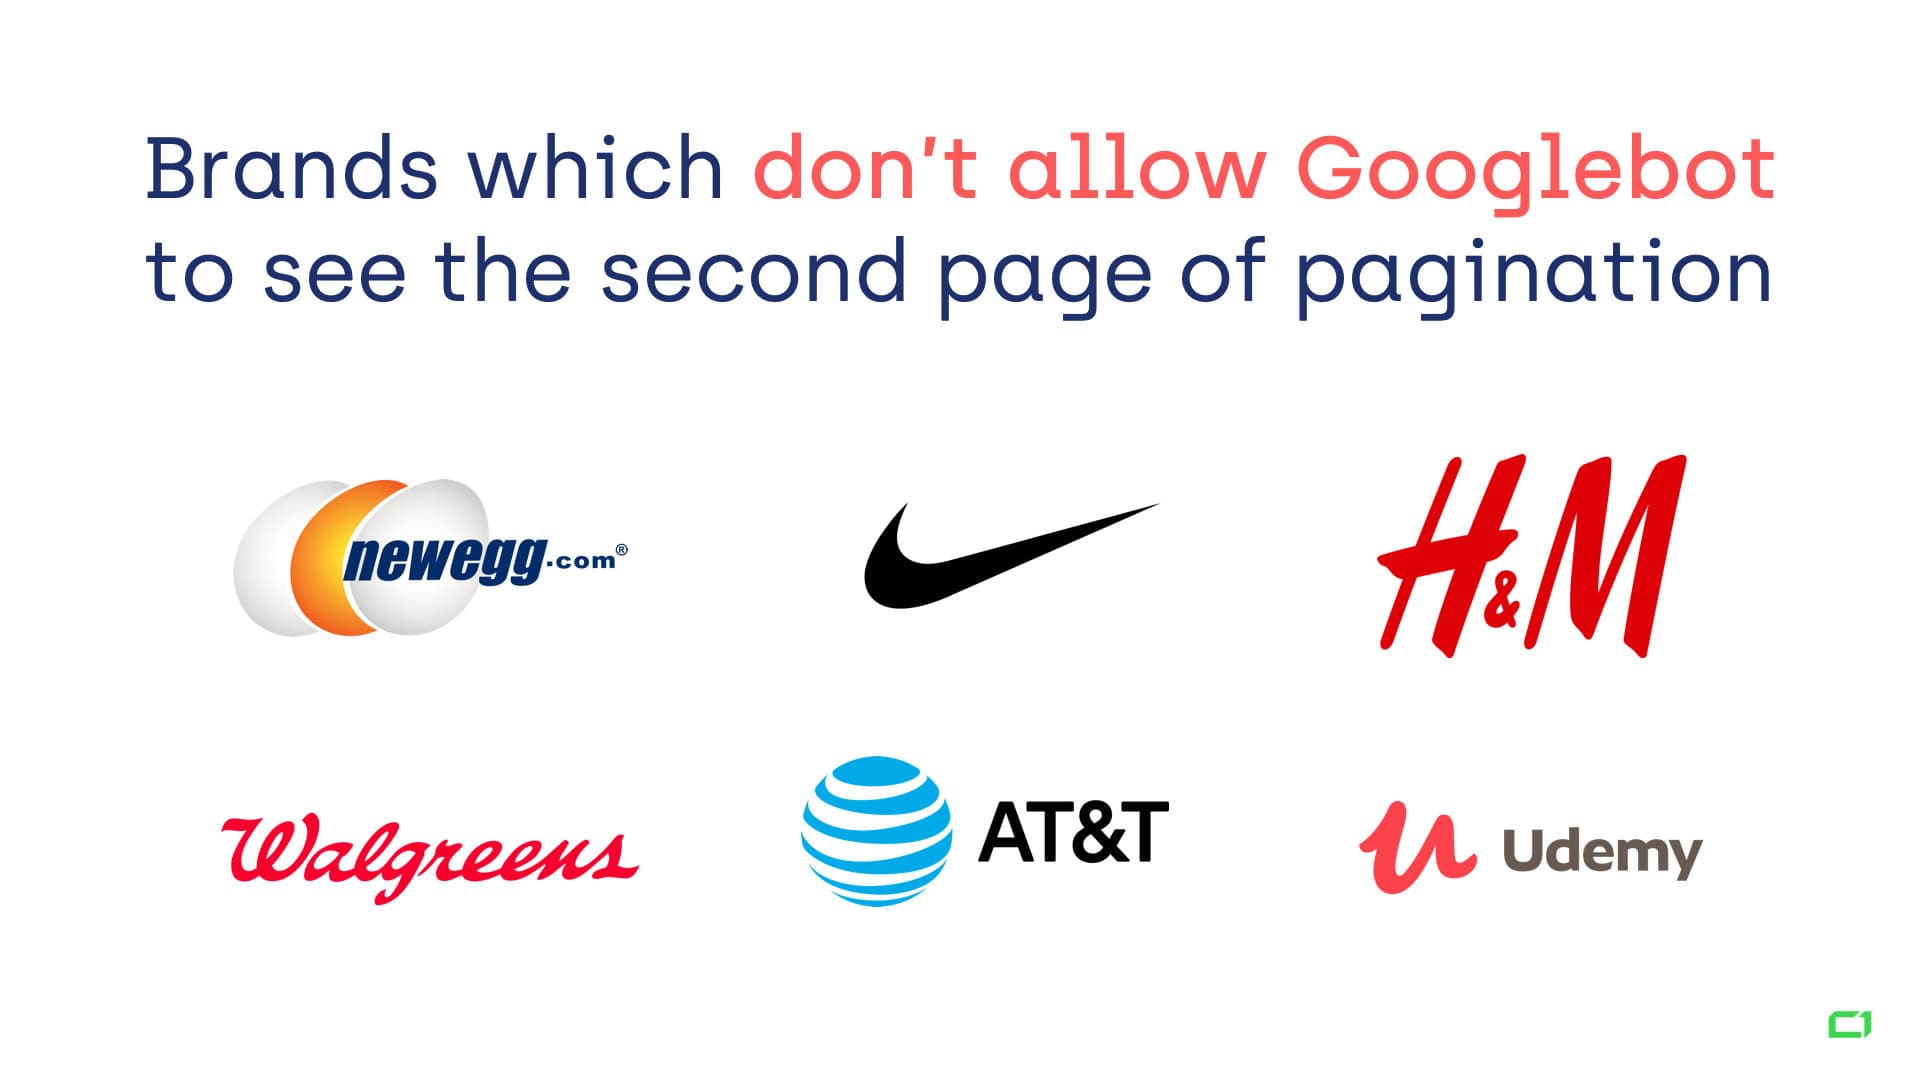 Brands that don't allow Googlebot to see the second page of pagination - Nike, H&M, Walgreens, AT&T, Udemy and Newegg